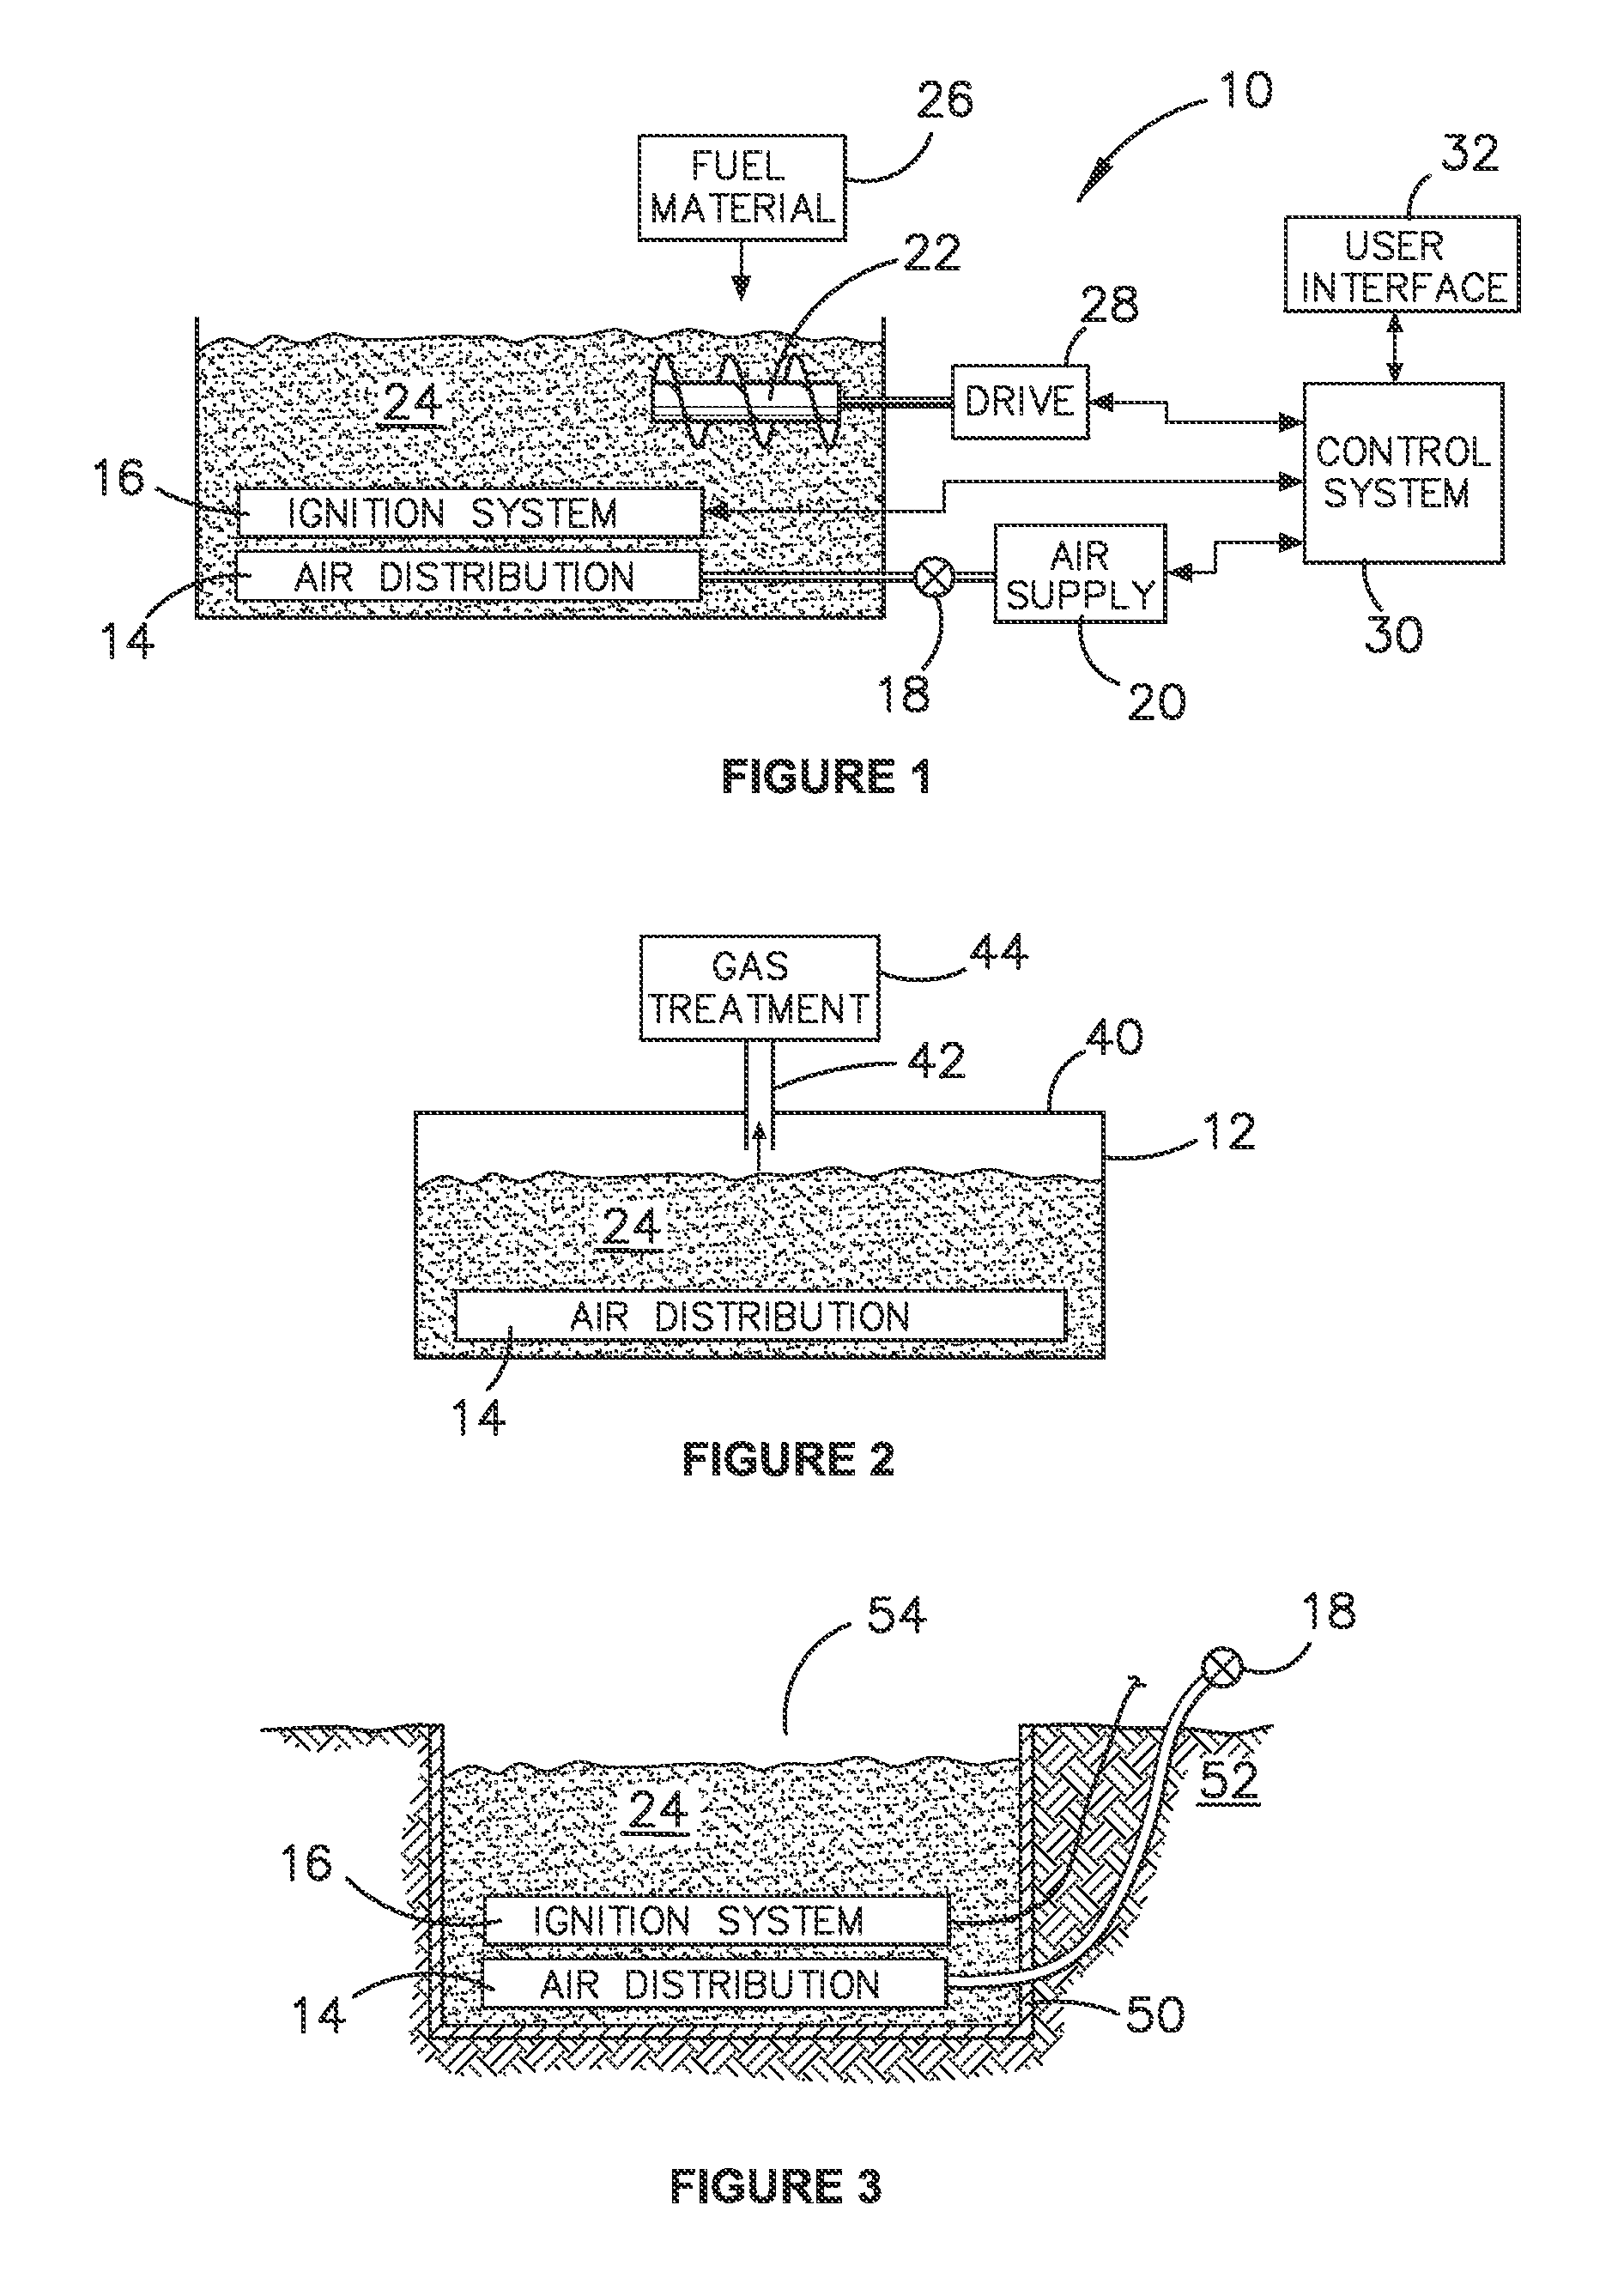 Thermal treatment of a contaminated volume of material